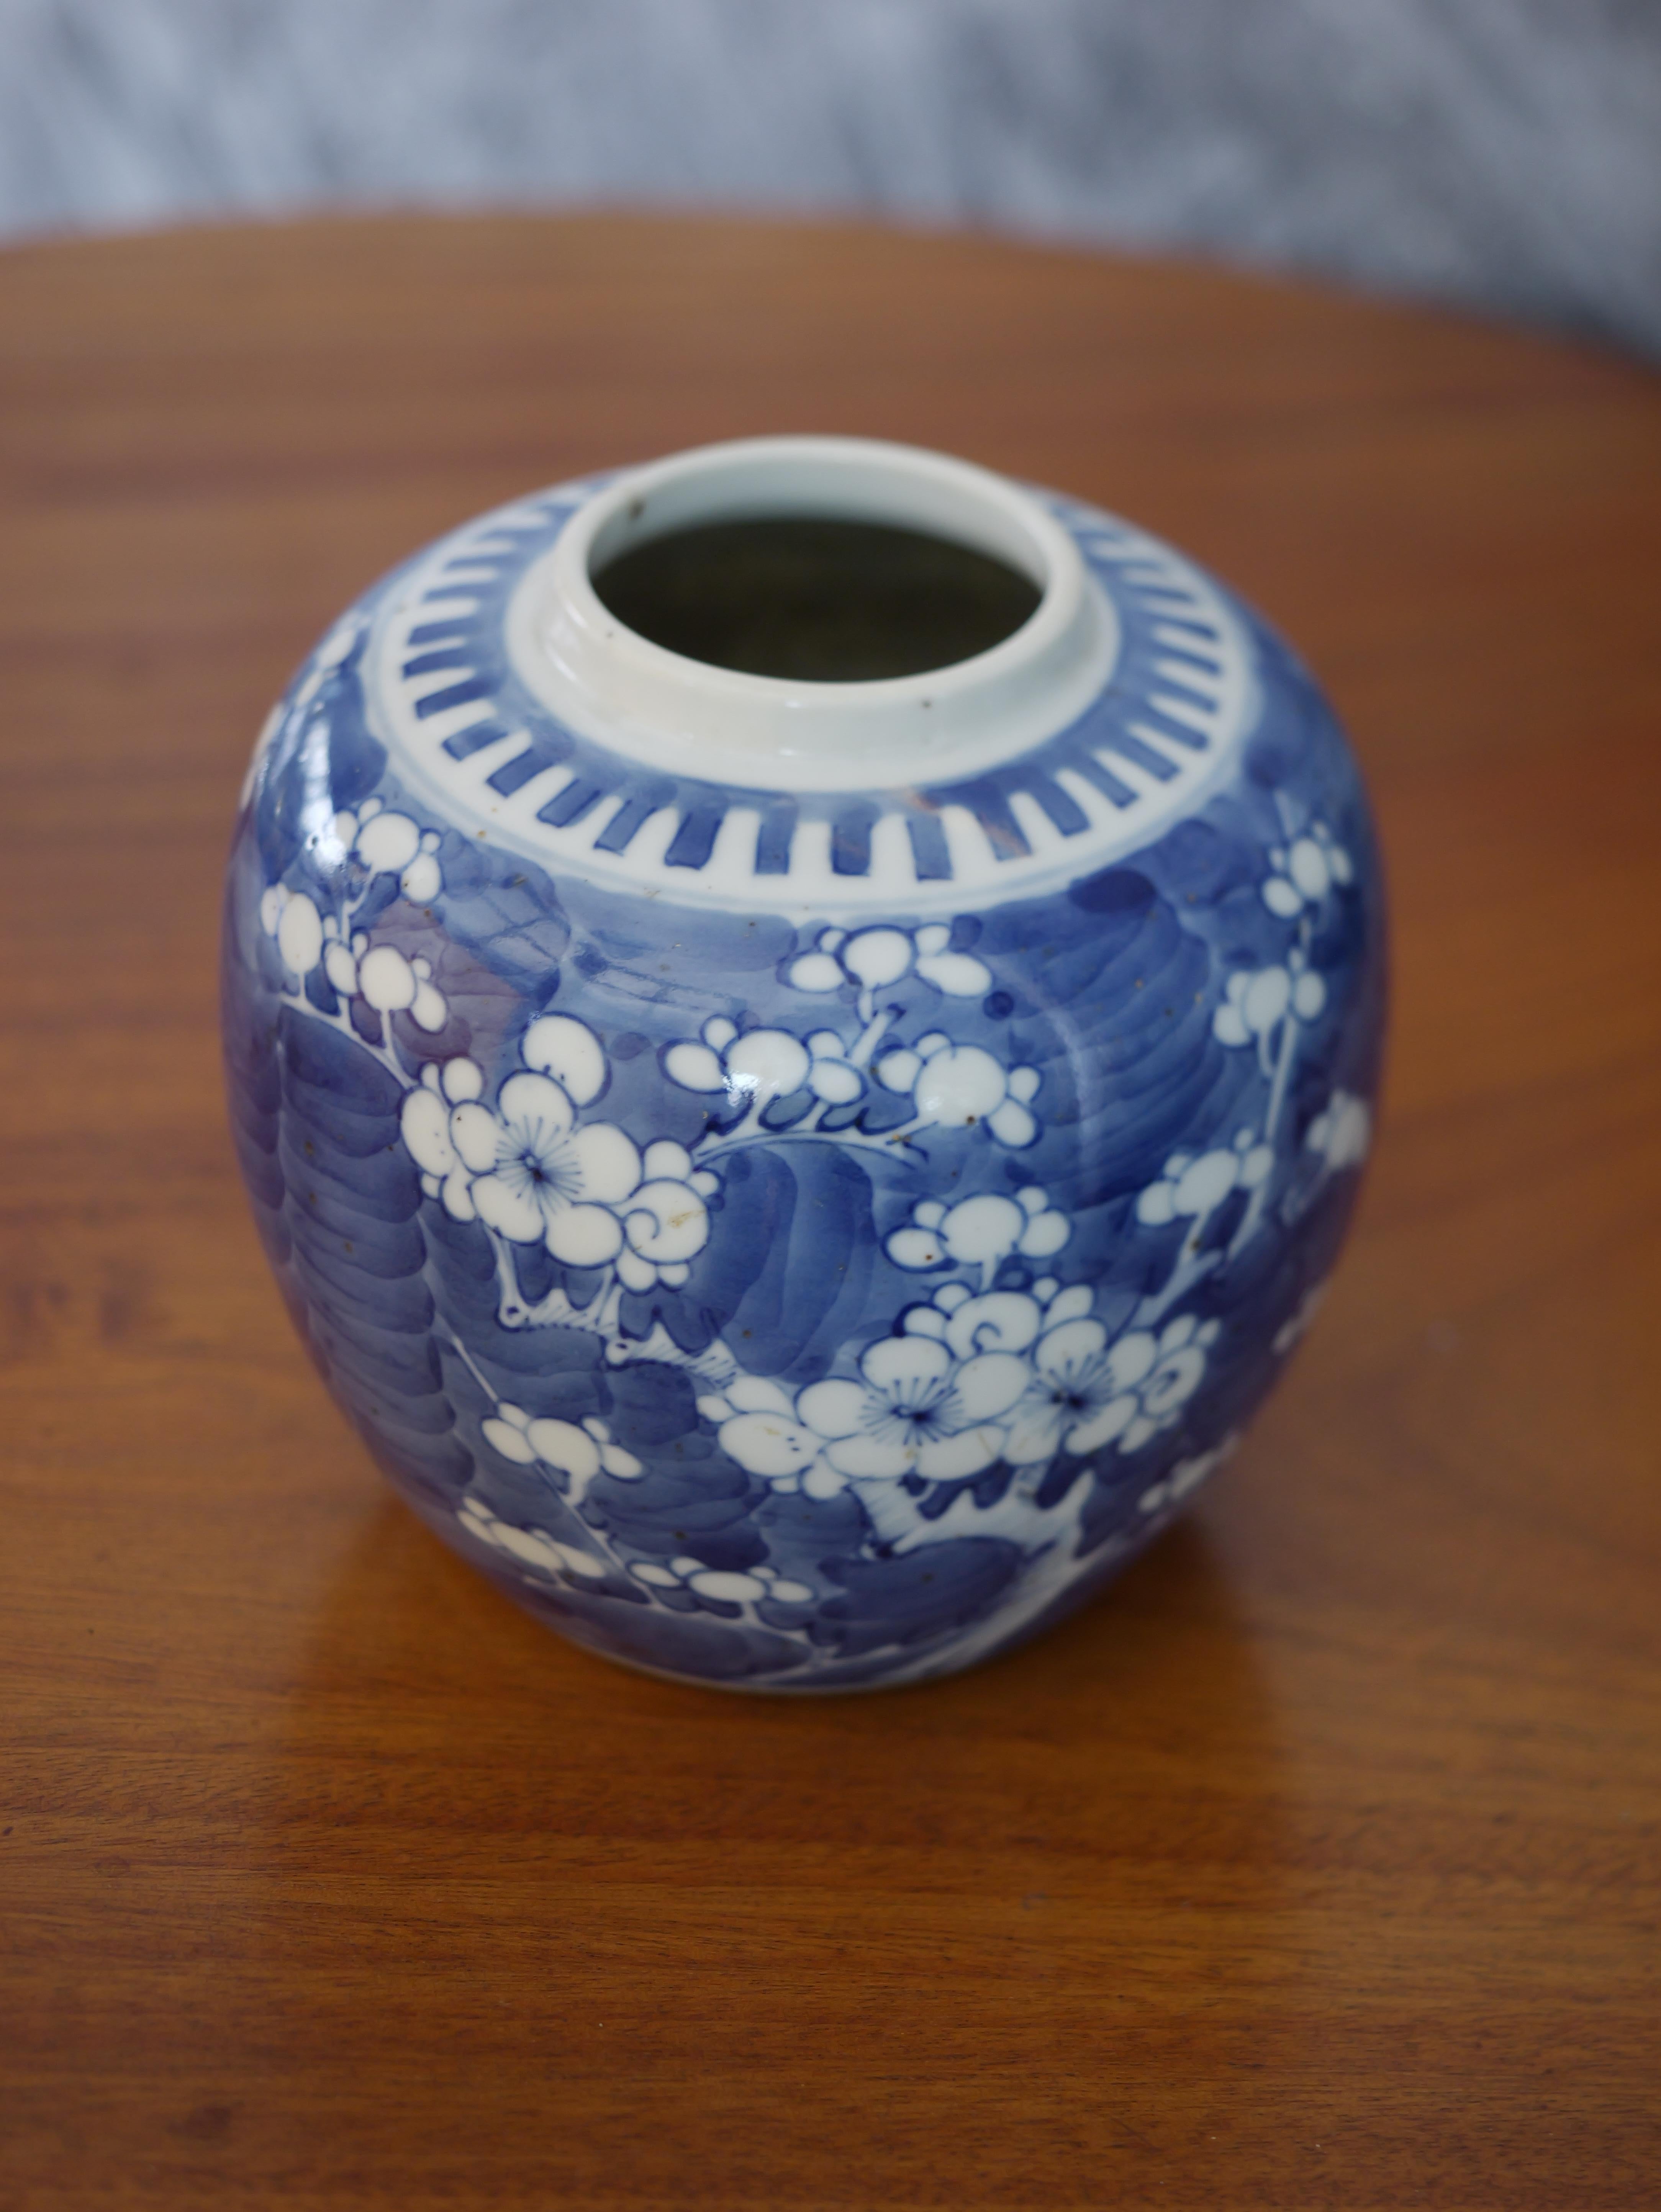 This antique Chinese Blue & White Prunus Blossoms Covered Ginger Jar from the Qing dynasty, dating from the mid-19th century, is a stunning piece despite missing its lid. The jar features classic blue and white hand-painted prunus blossom motifs, a